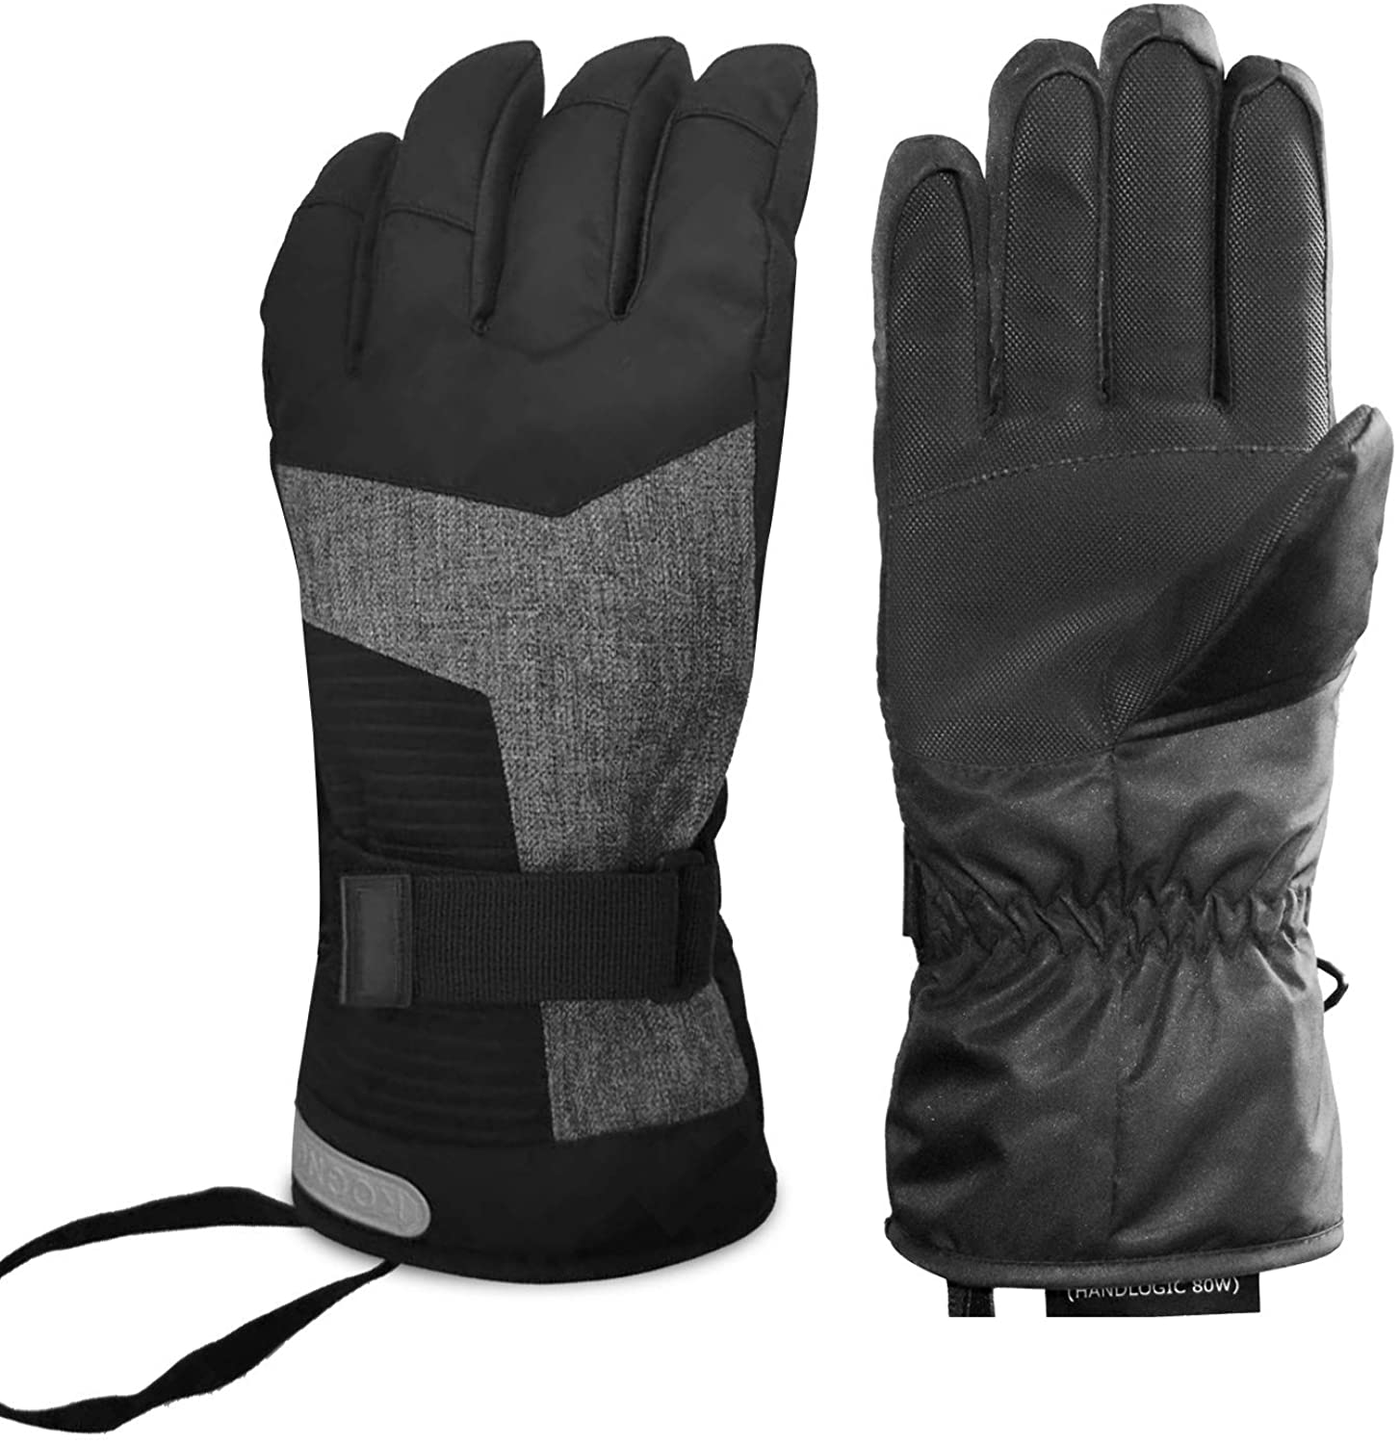 KOGNGU Ski Gloves Warm Snow Gloves Waterproof Insulated 3M Thermal Cotton for Cold Weather Suitable for Men and Women